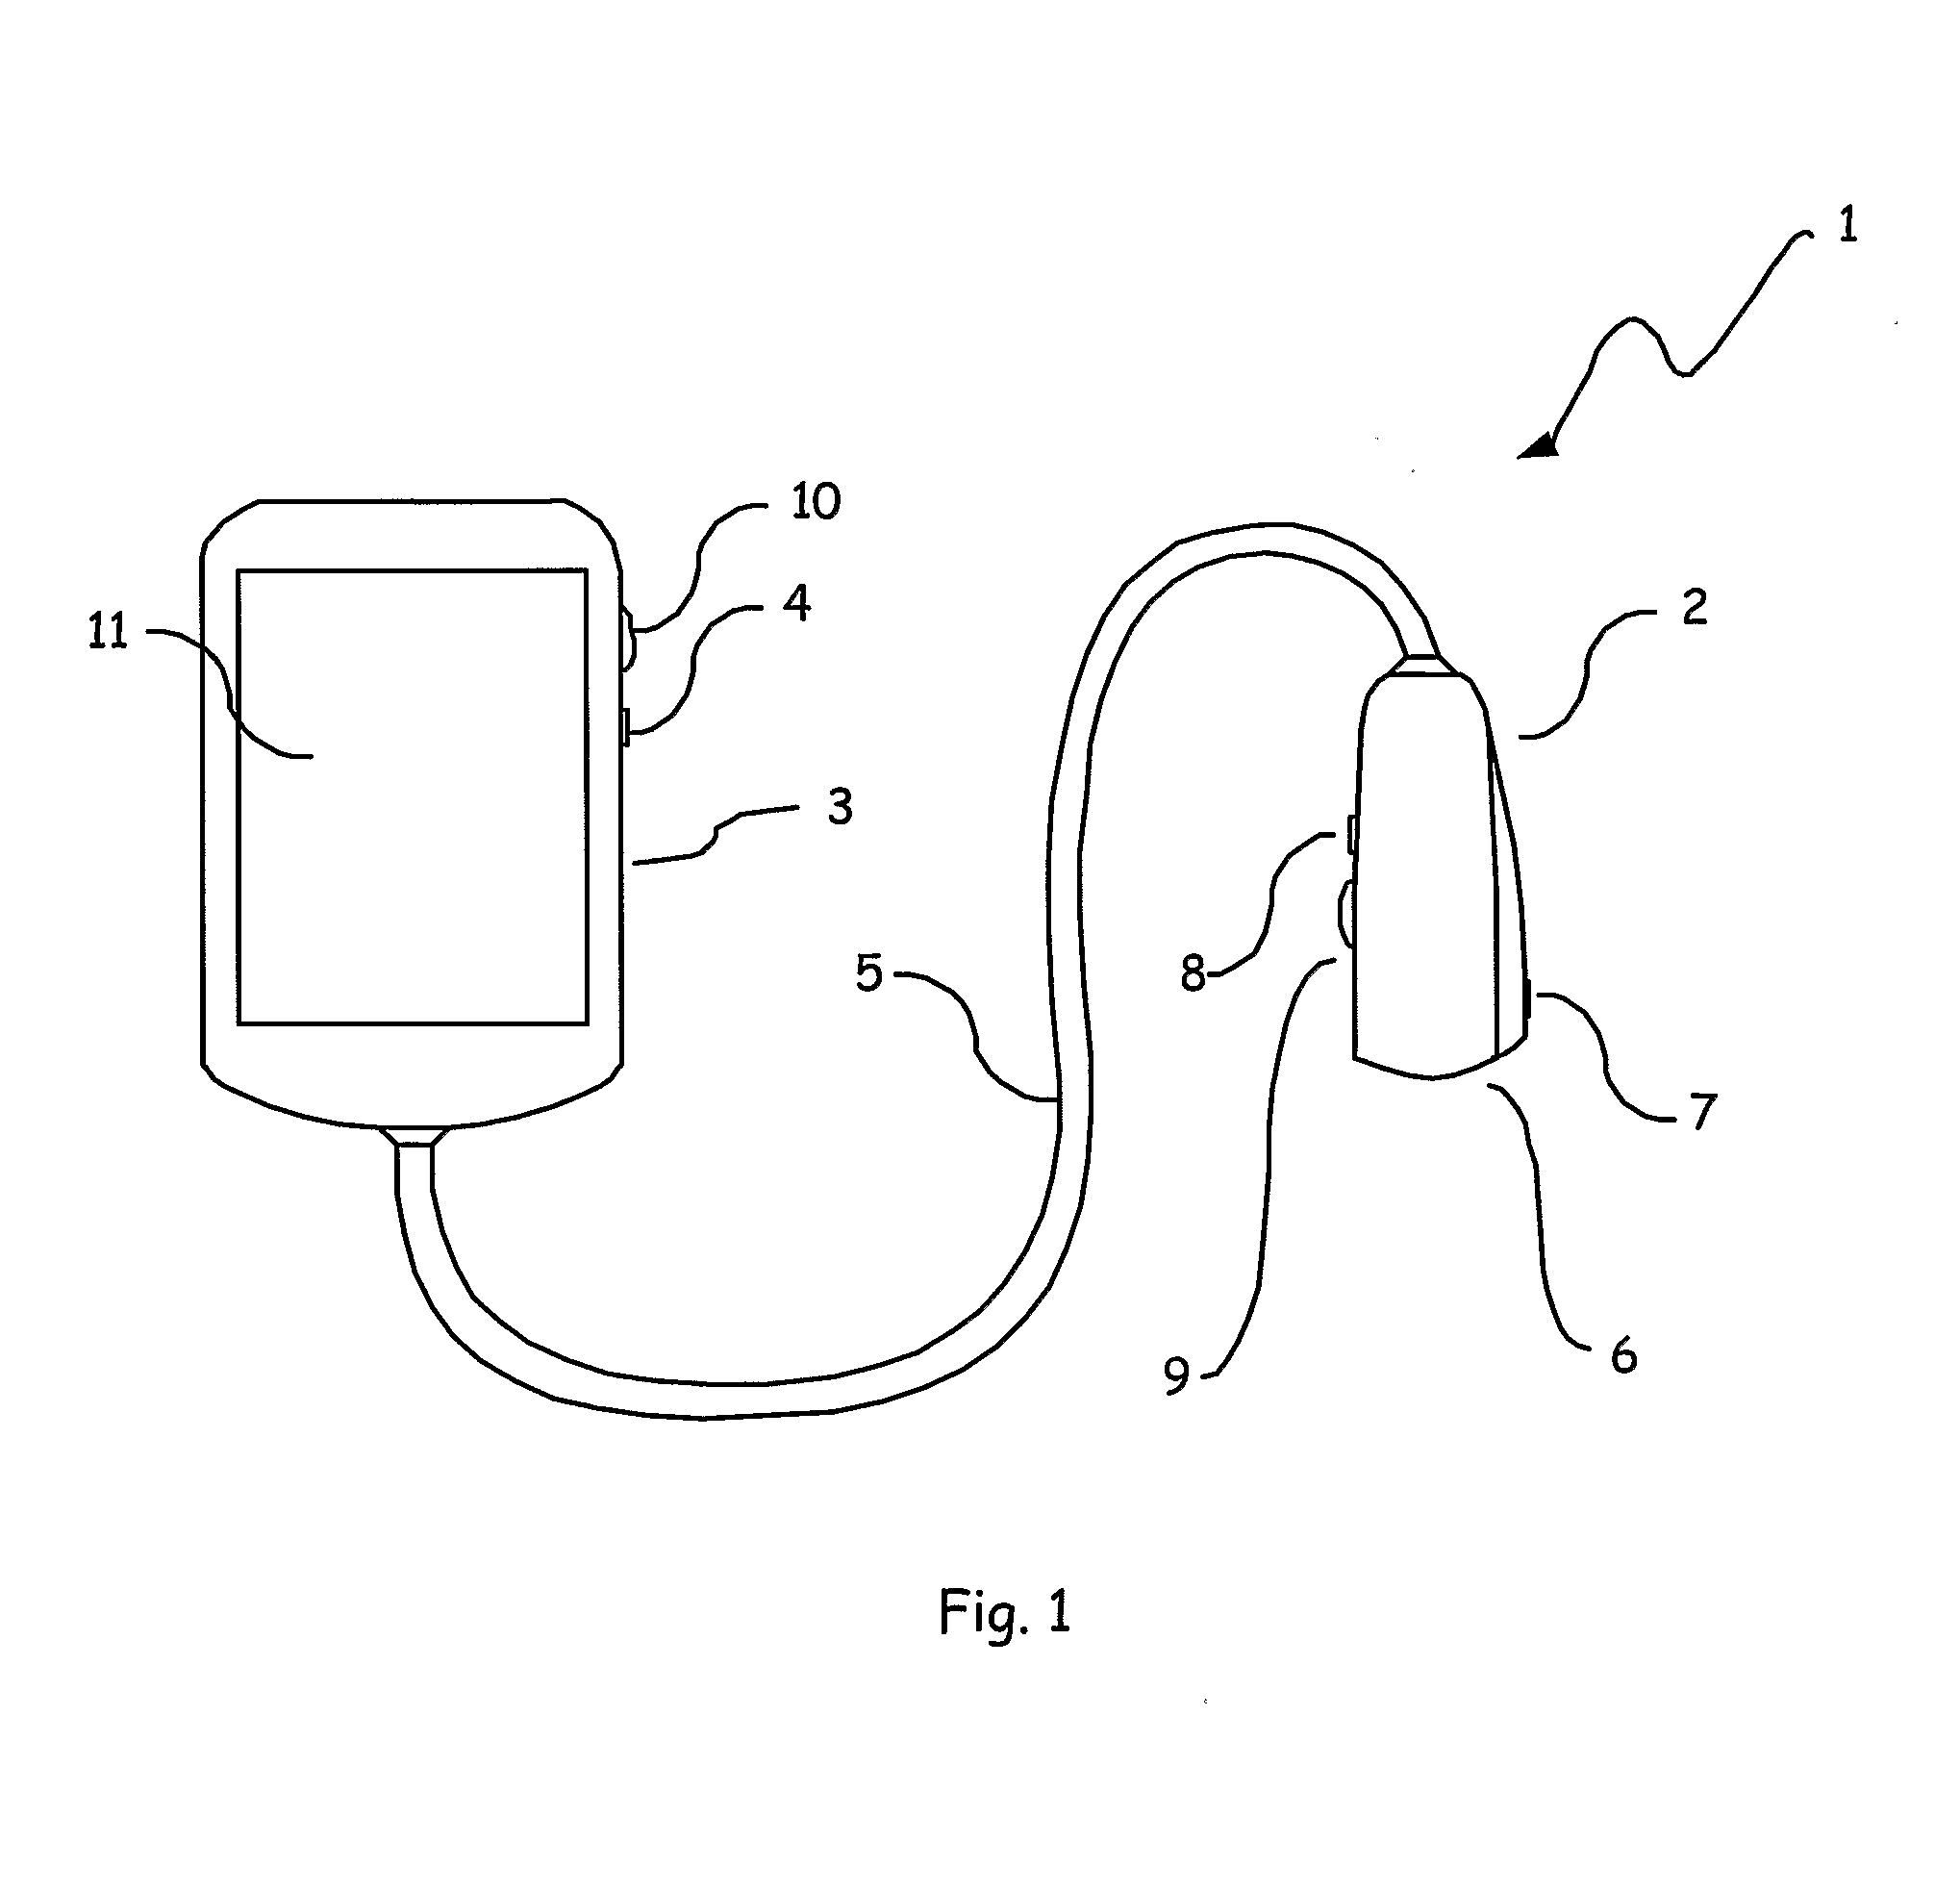 Ultrasound Measurement System and Method